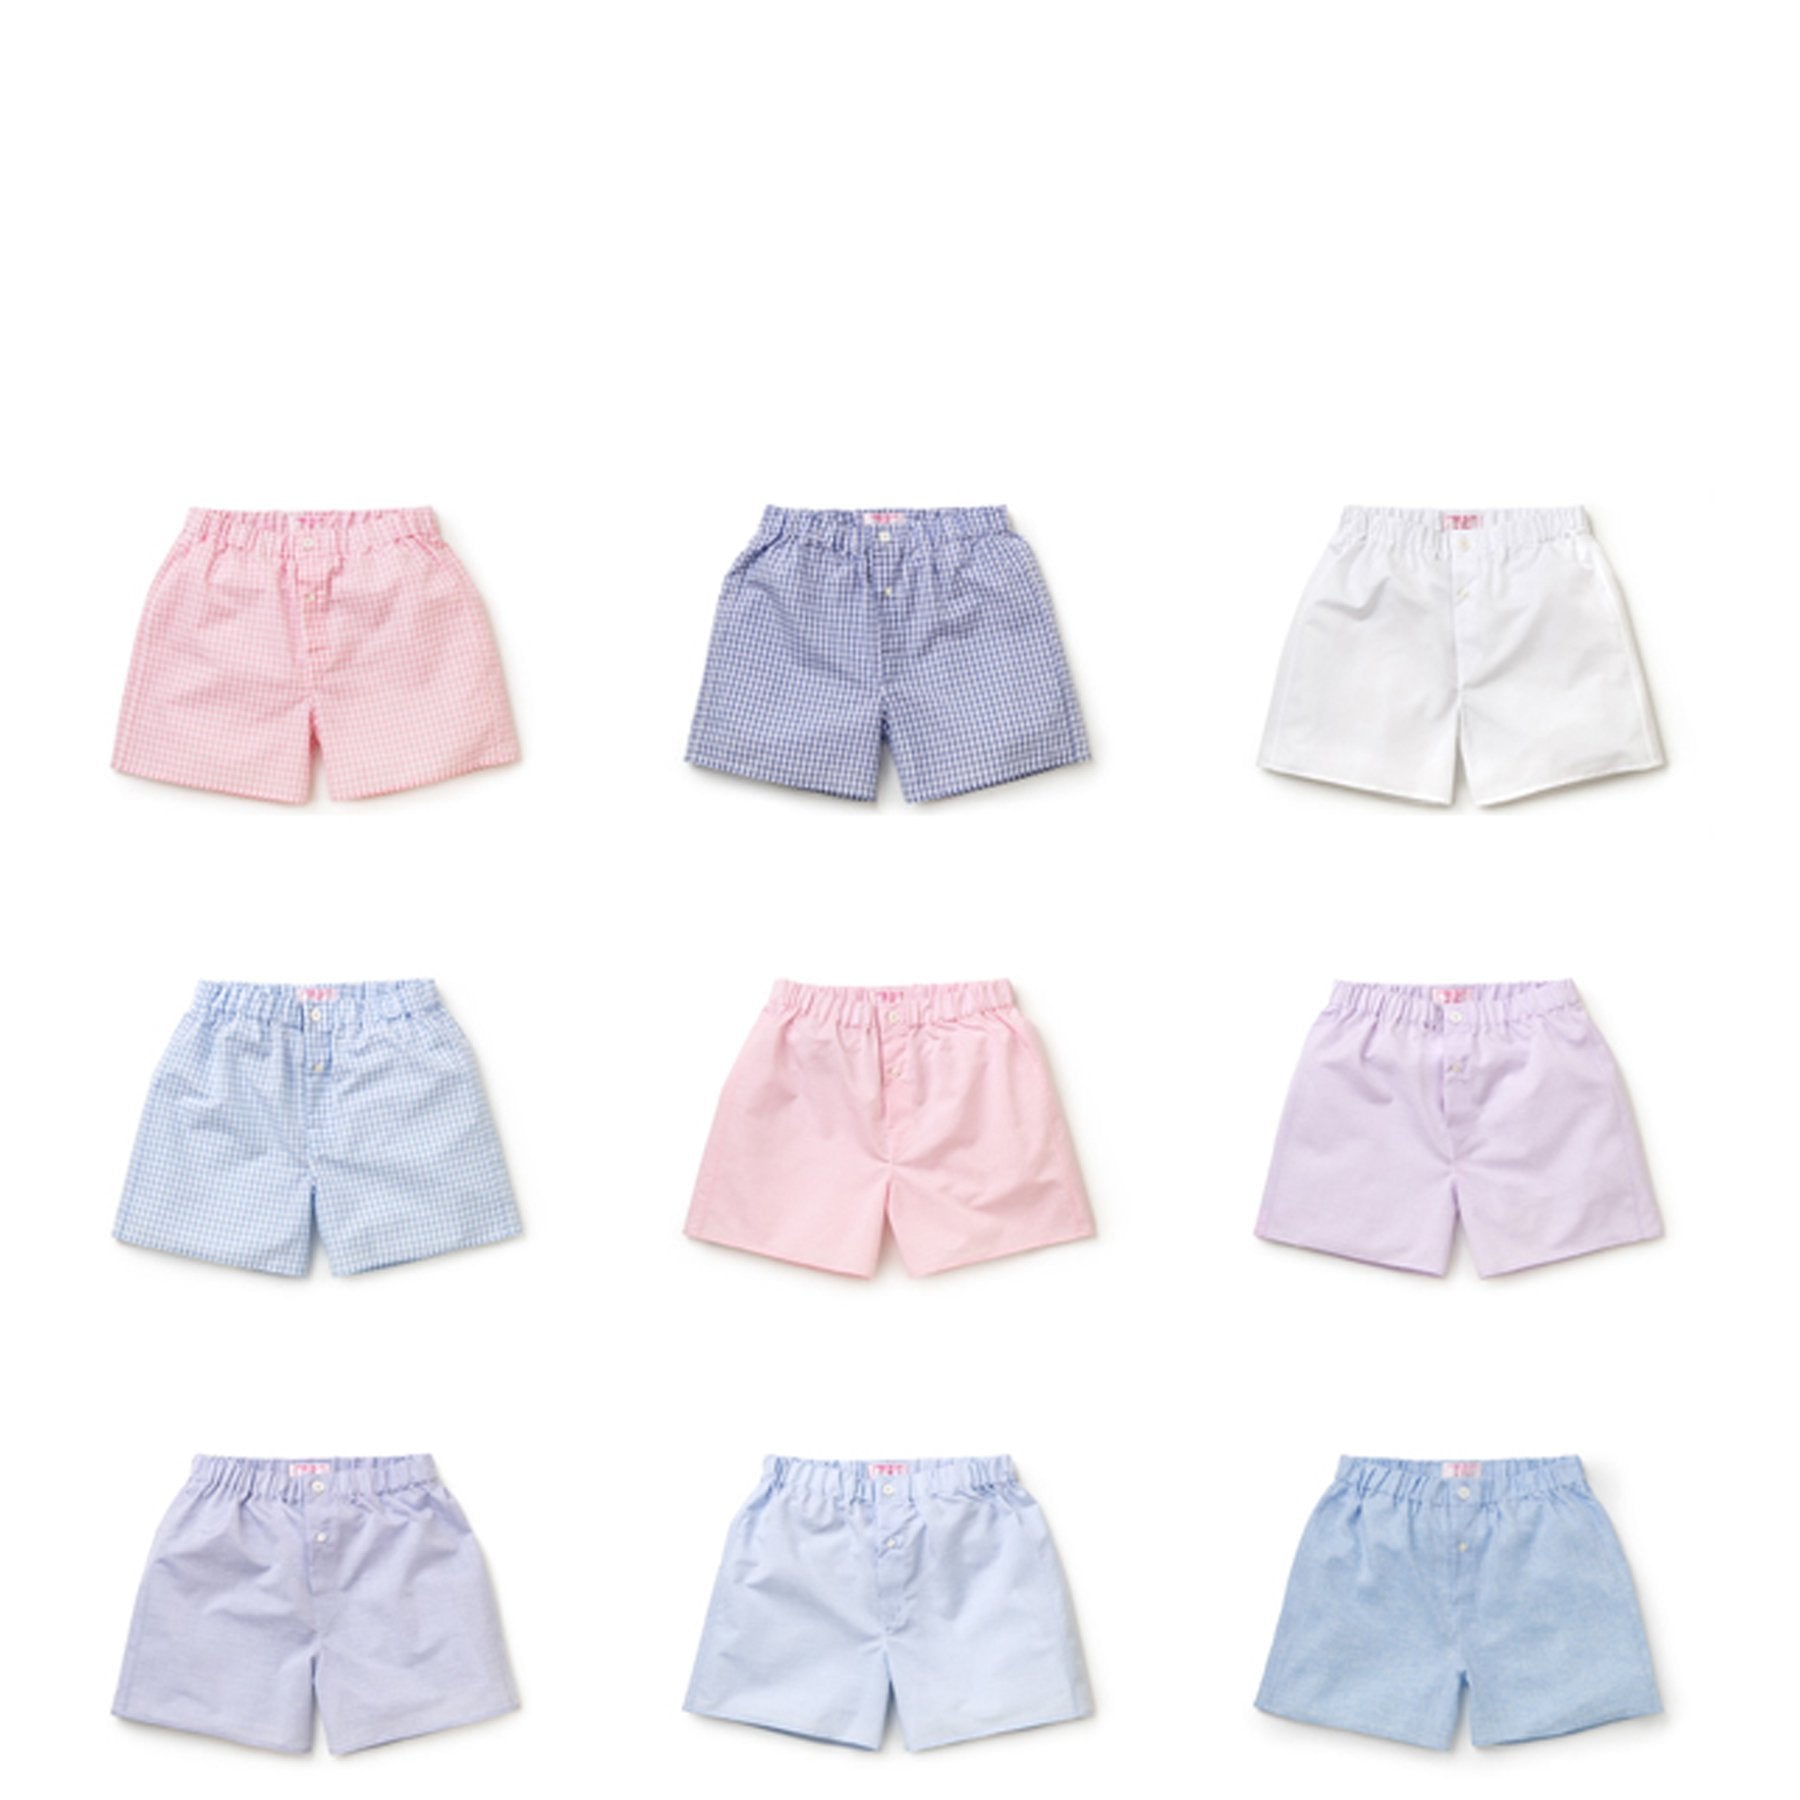 Our boxer shorts are DARLING! - Emma Willis